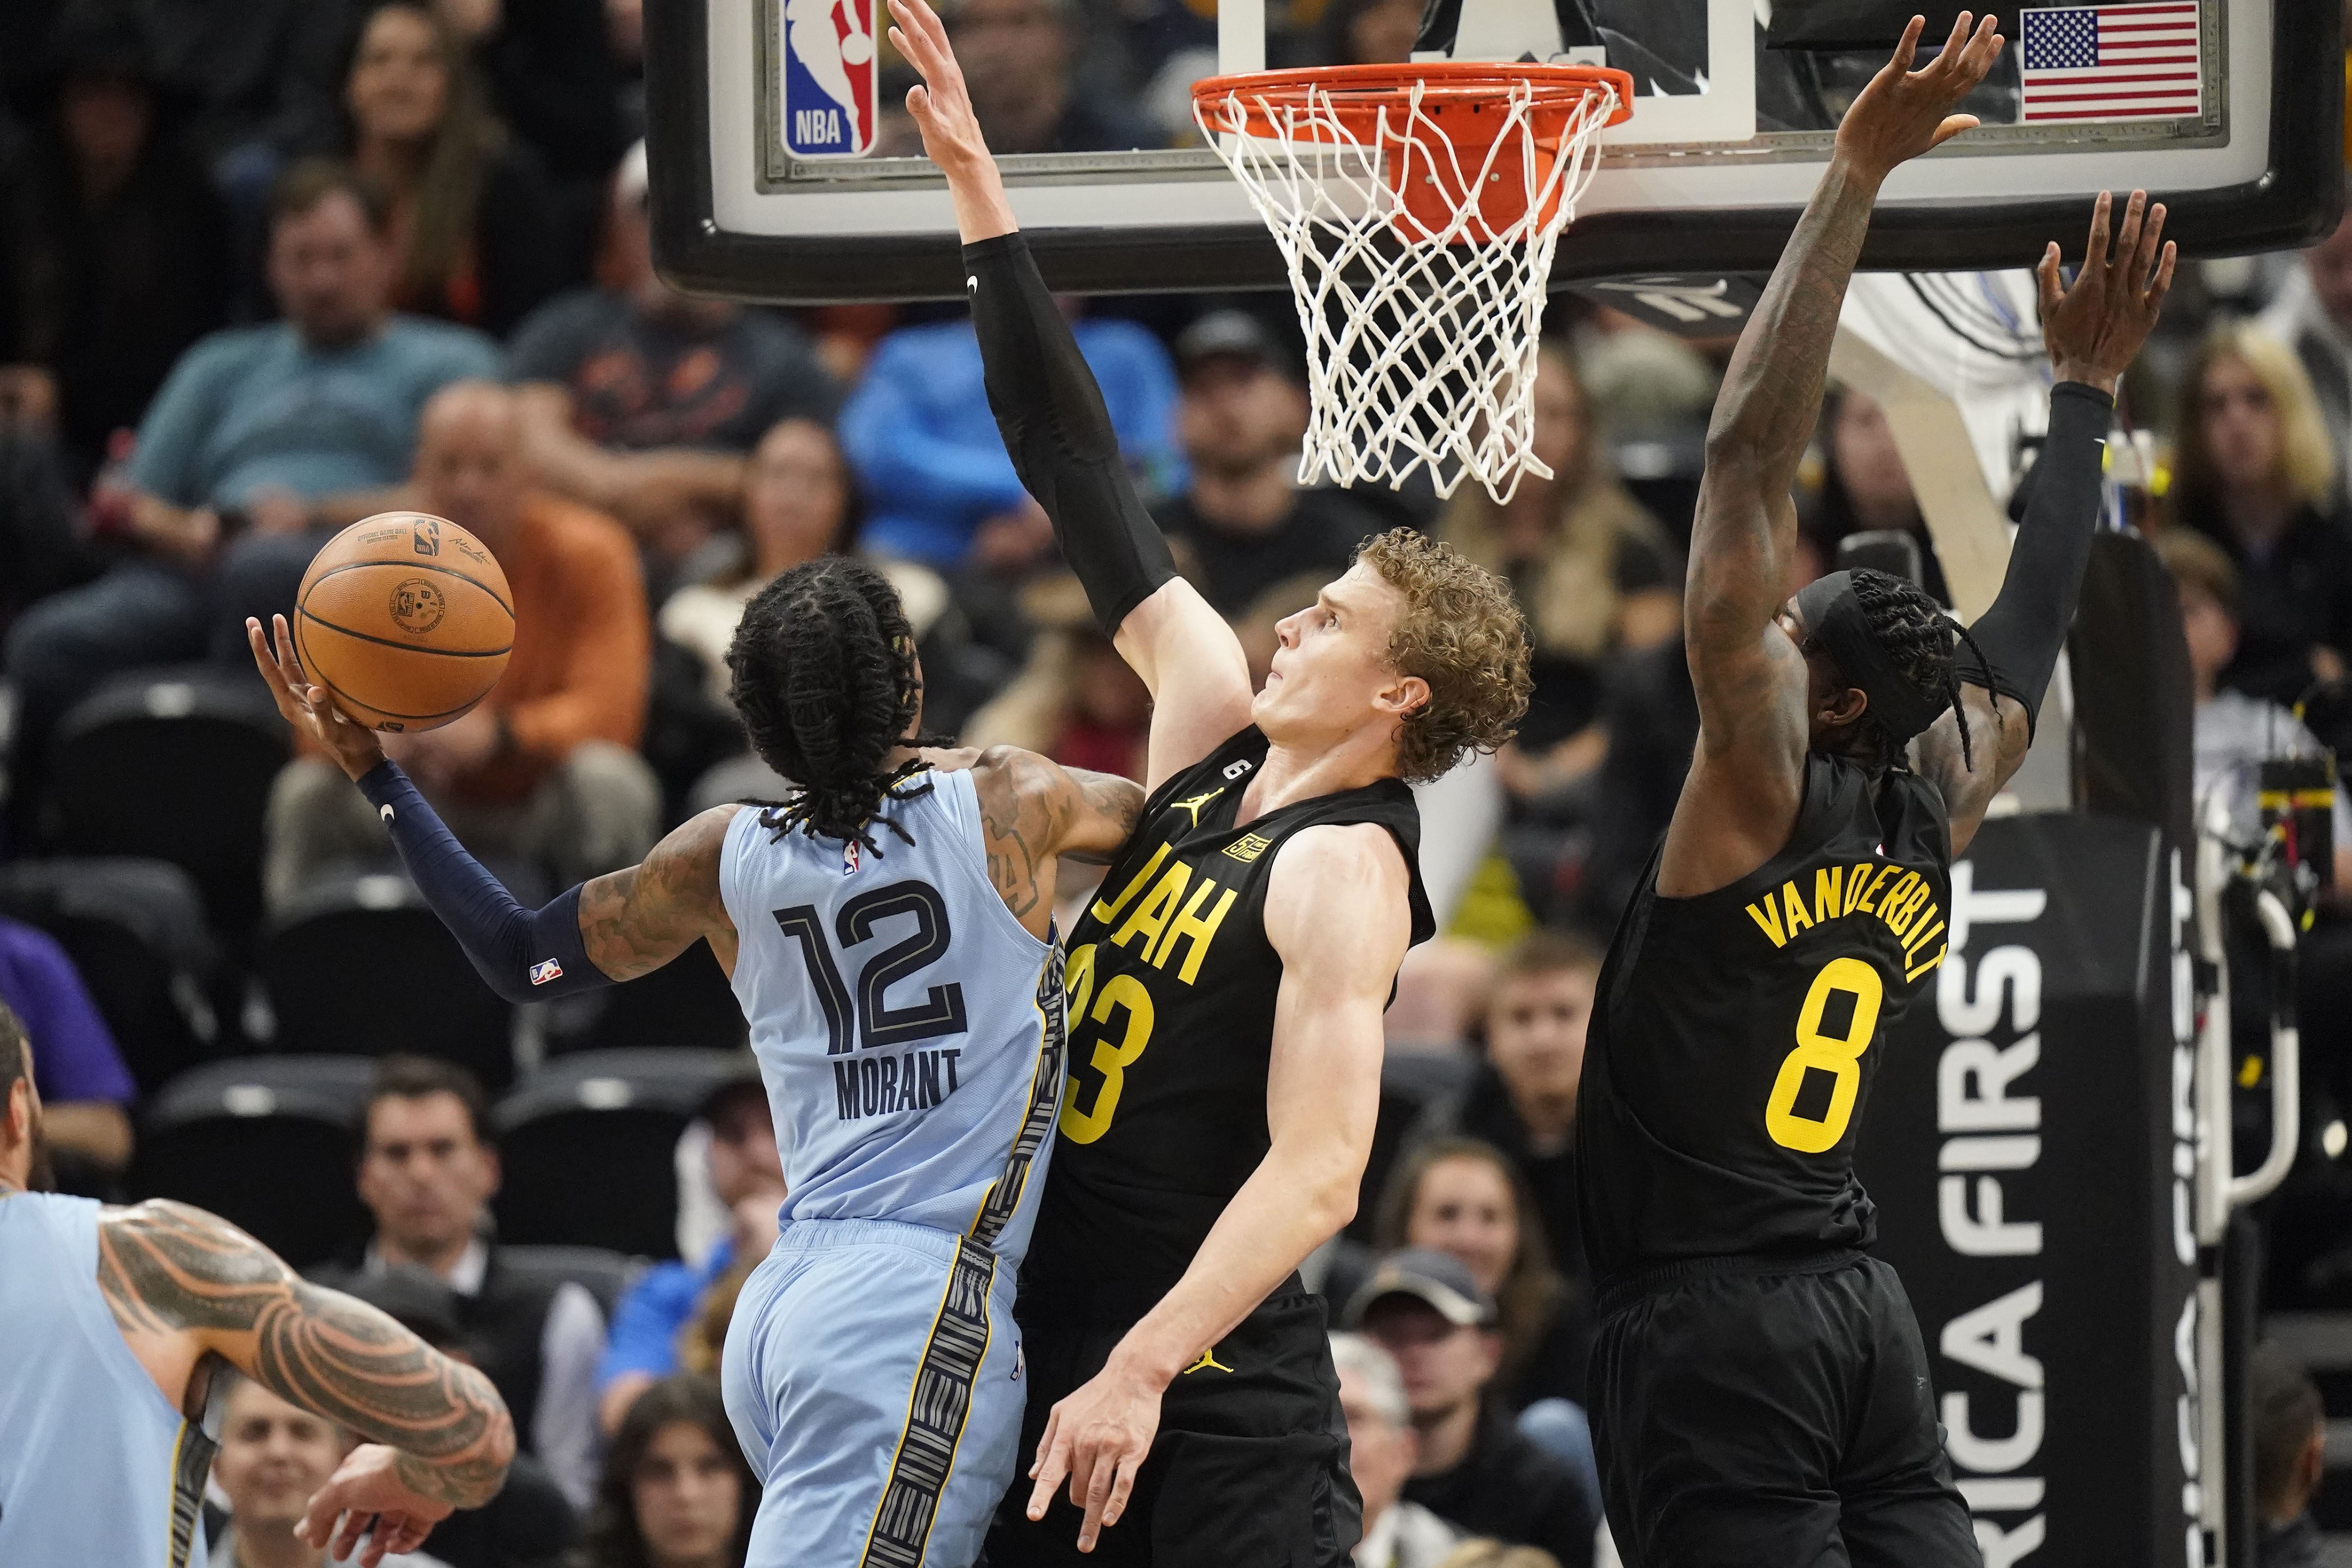 Jazz rout Grizzlies 121-105, improve to 4-0 at home